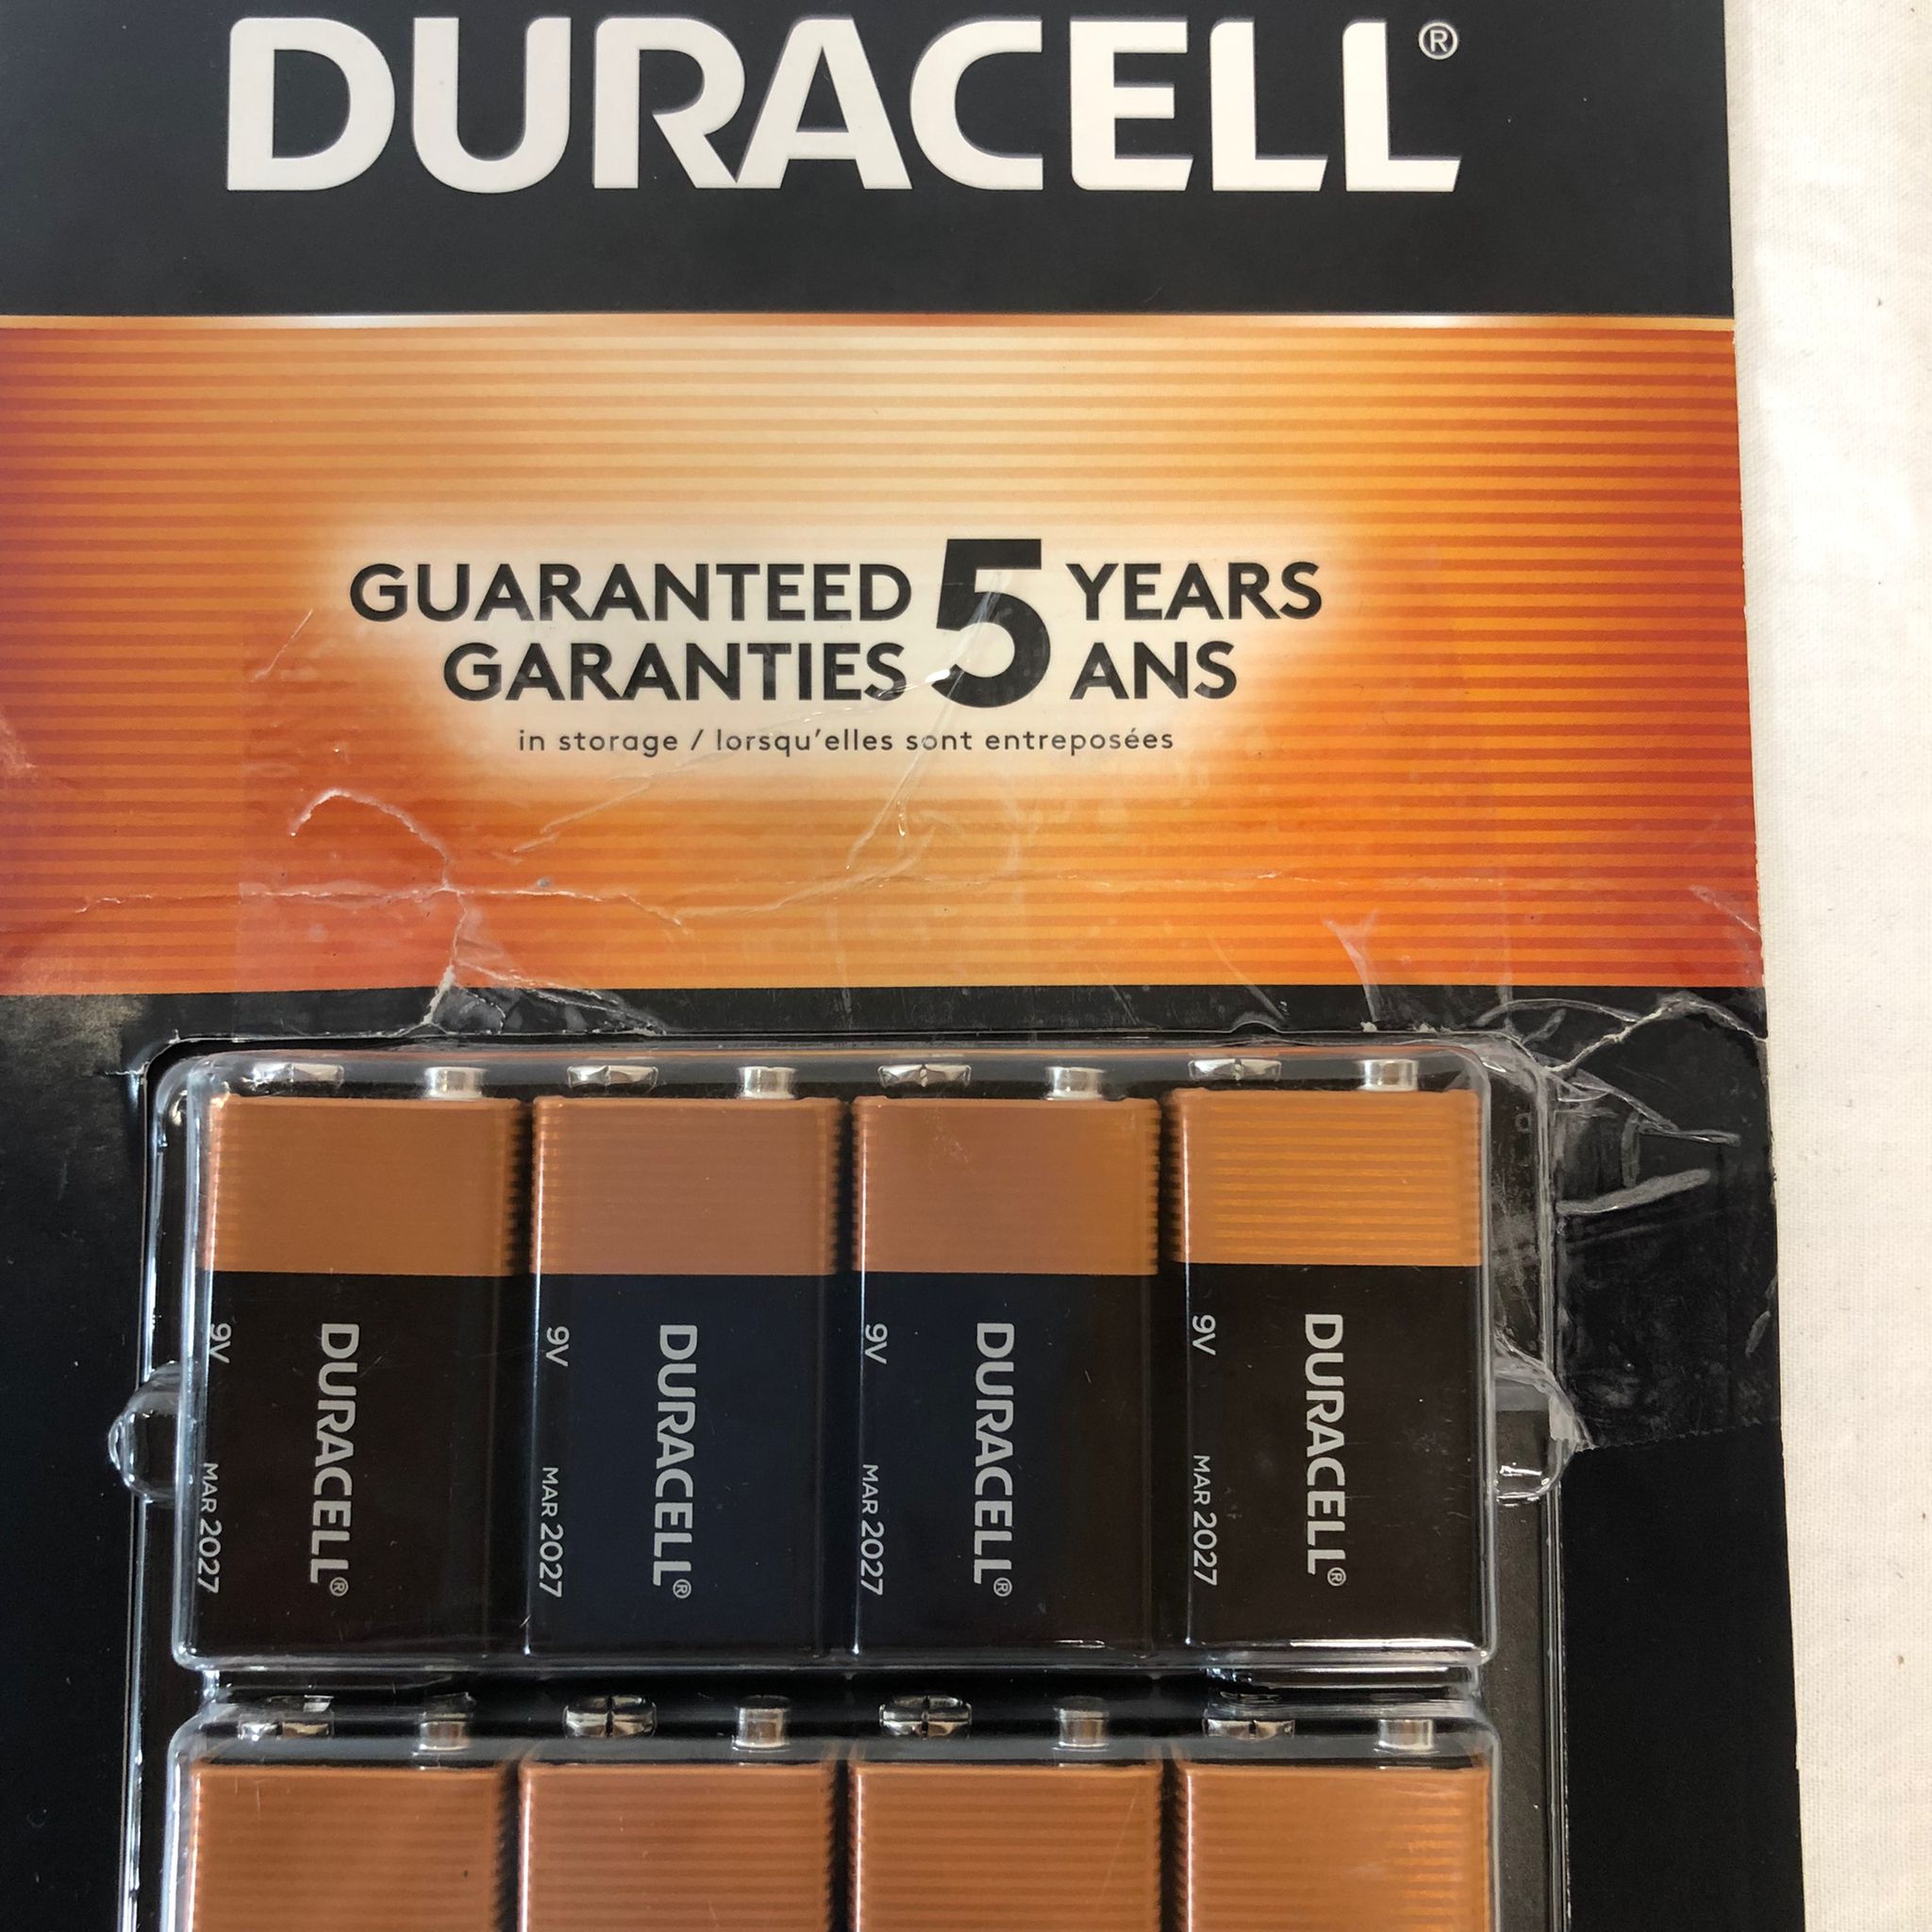 As is Duracell 9V Alkaline Batteries, 8-count